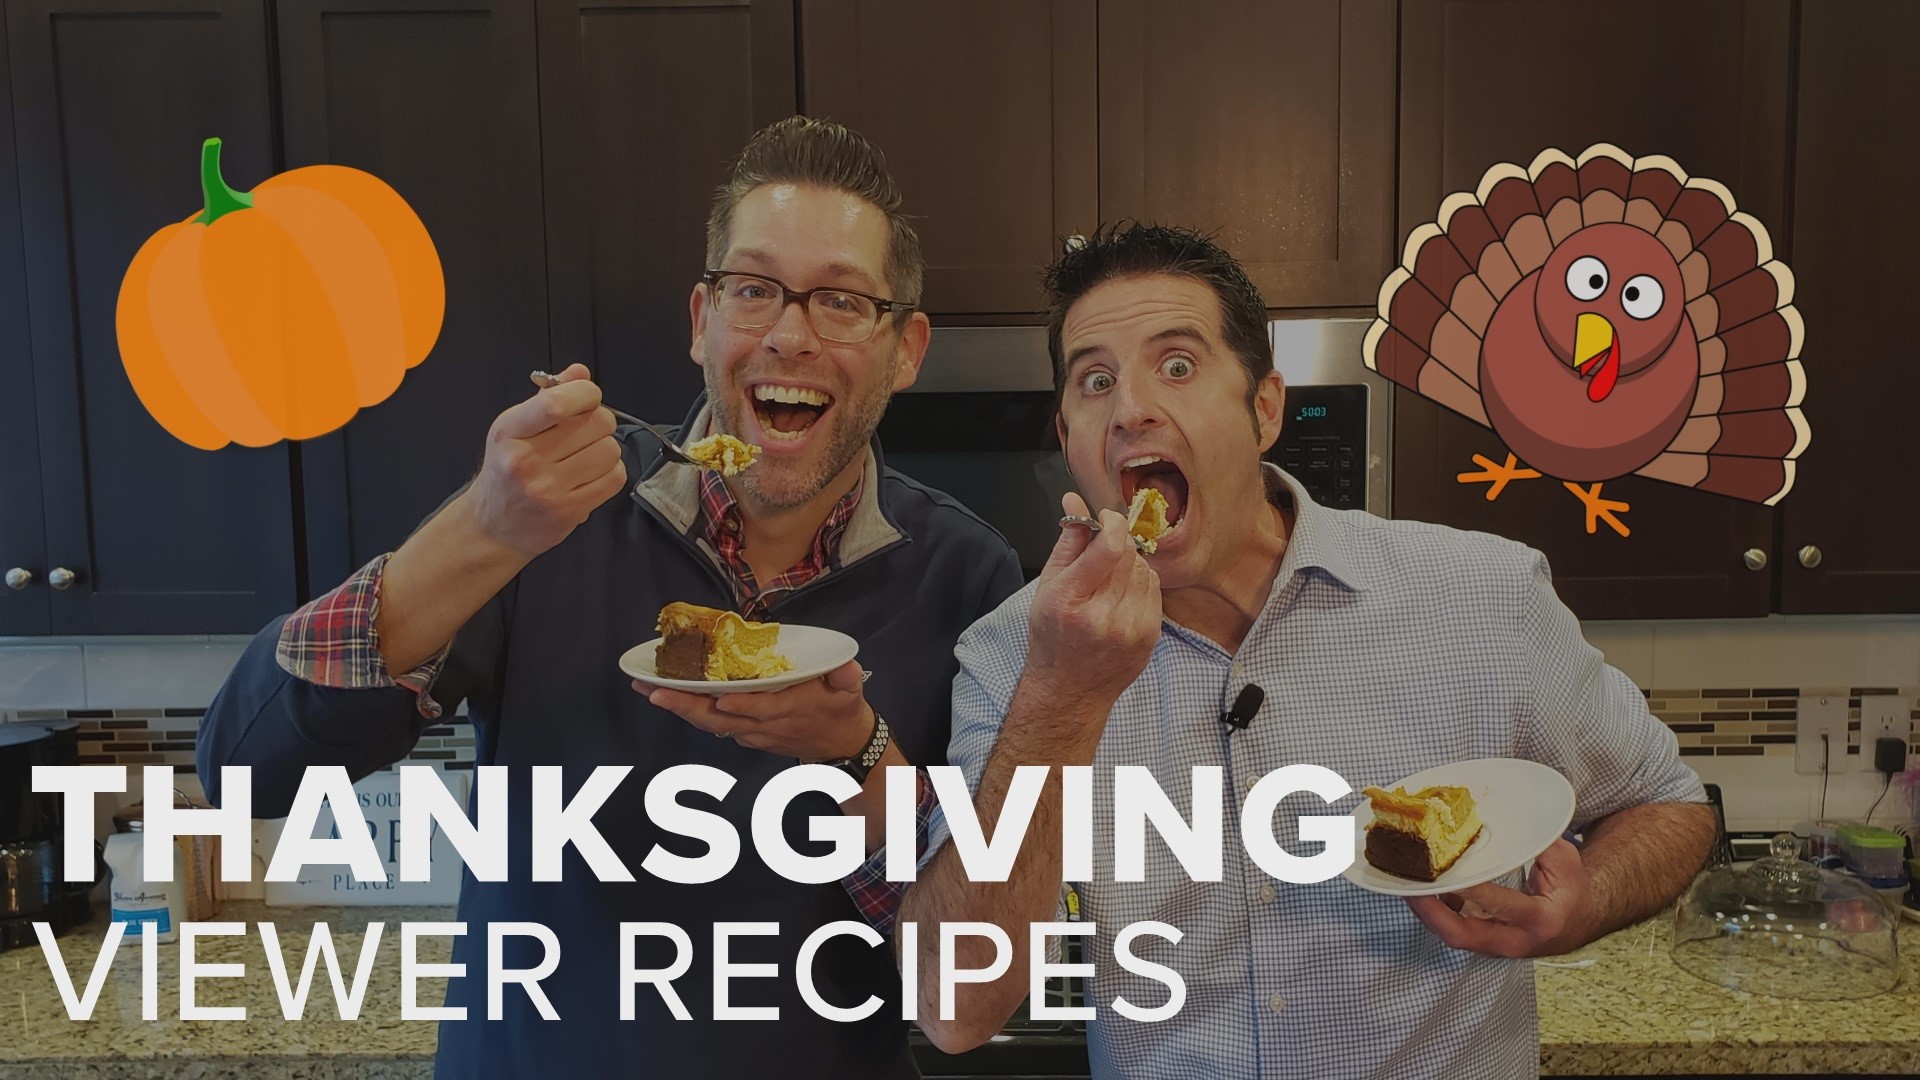 Remember Drew Carney's favorite summer recipes? We now extend that to the classic Turkey Day eat fest.